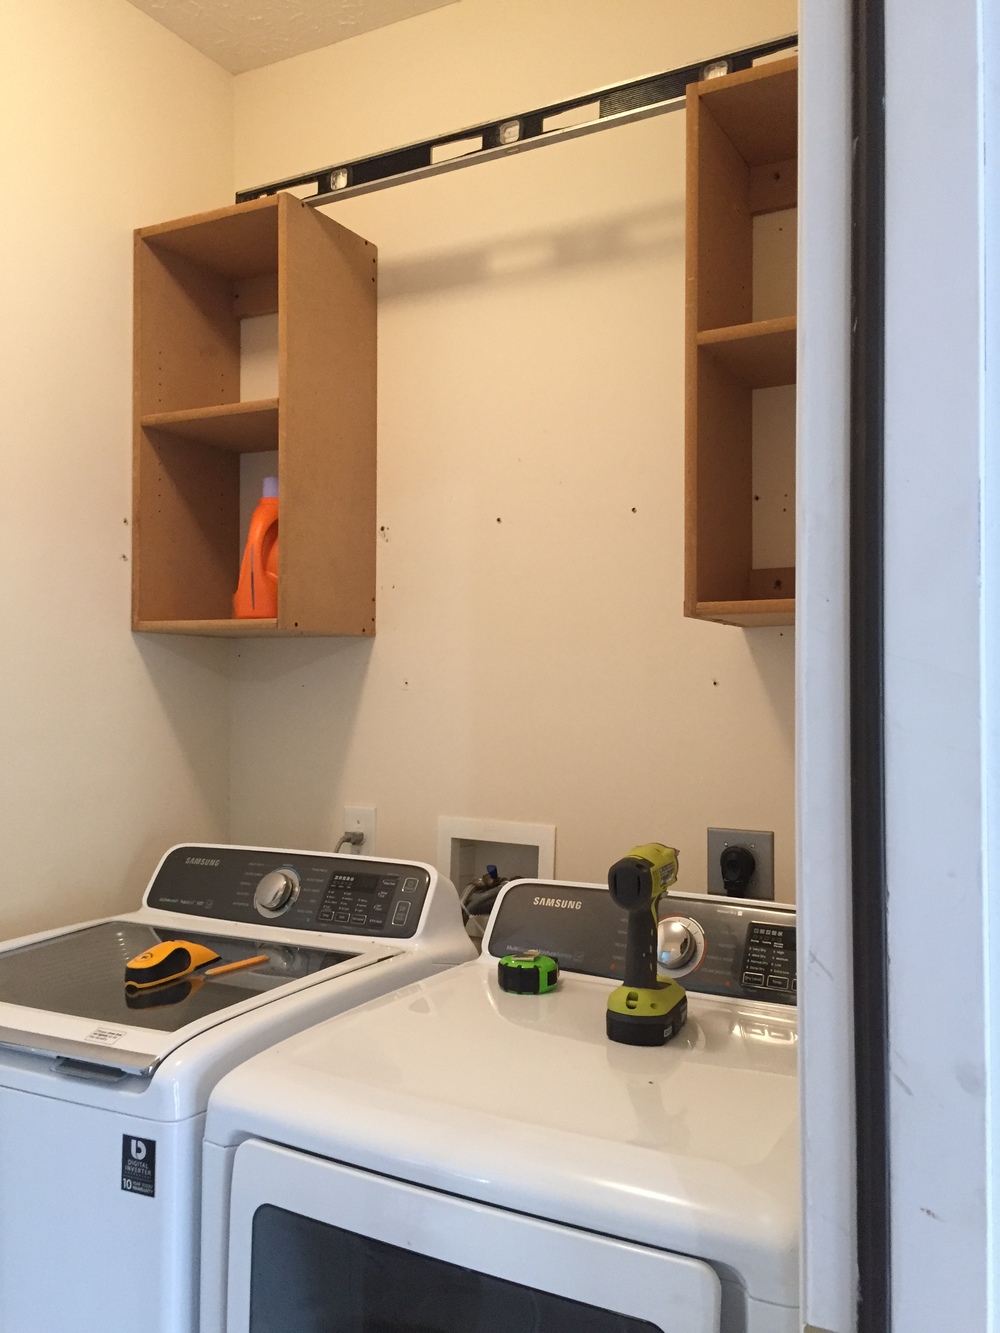 Upper Cabinets Laundry Room Makeover, How To Diy Laundry Room Cabinets